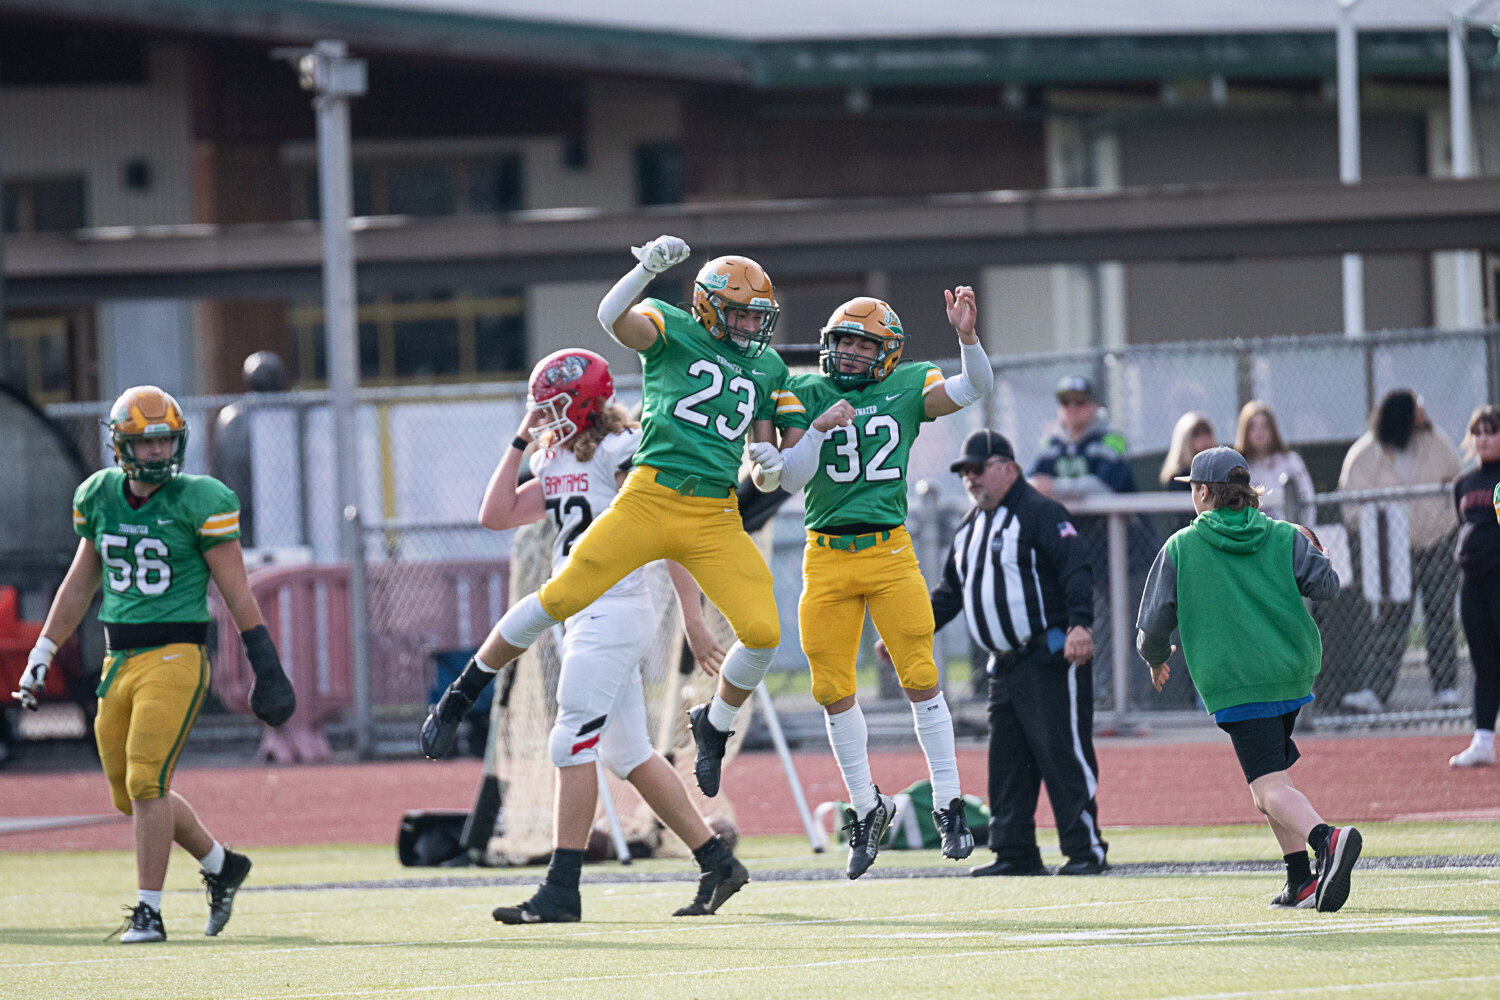 Cash Short (23) celebrates with Peyton Davis after intercepting a pass during Tumwater's 42-6 win over Clarkston in the 2A quarterfinals in Tumwater on Nov. 18.